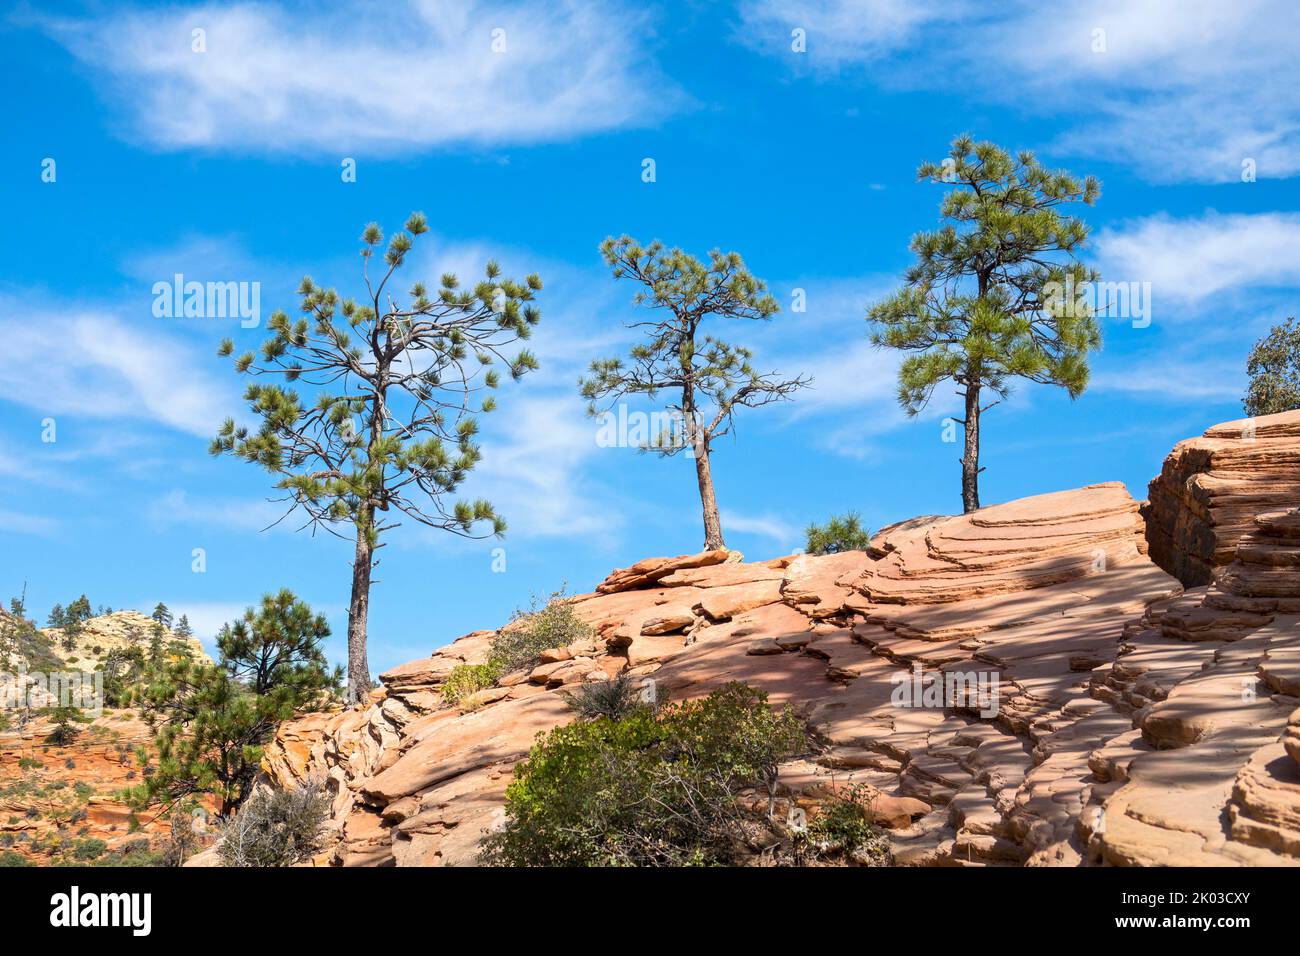 Zion National Park is located in southwestern Utah on the border with Arizona. It ha an area of 579 kö² and lies between 1128 m and 2660 m altitude. Three pine trees on rock at Angels Landing Trail. Stock Photo